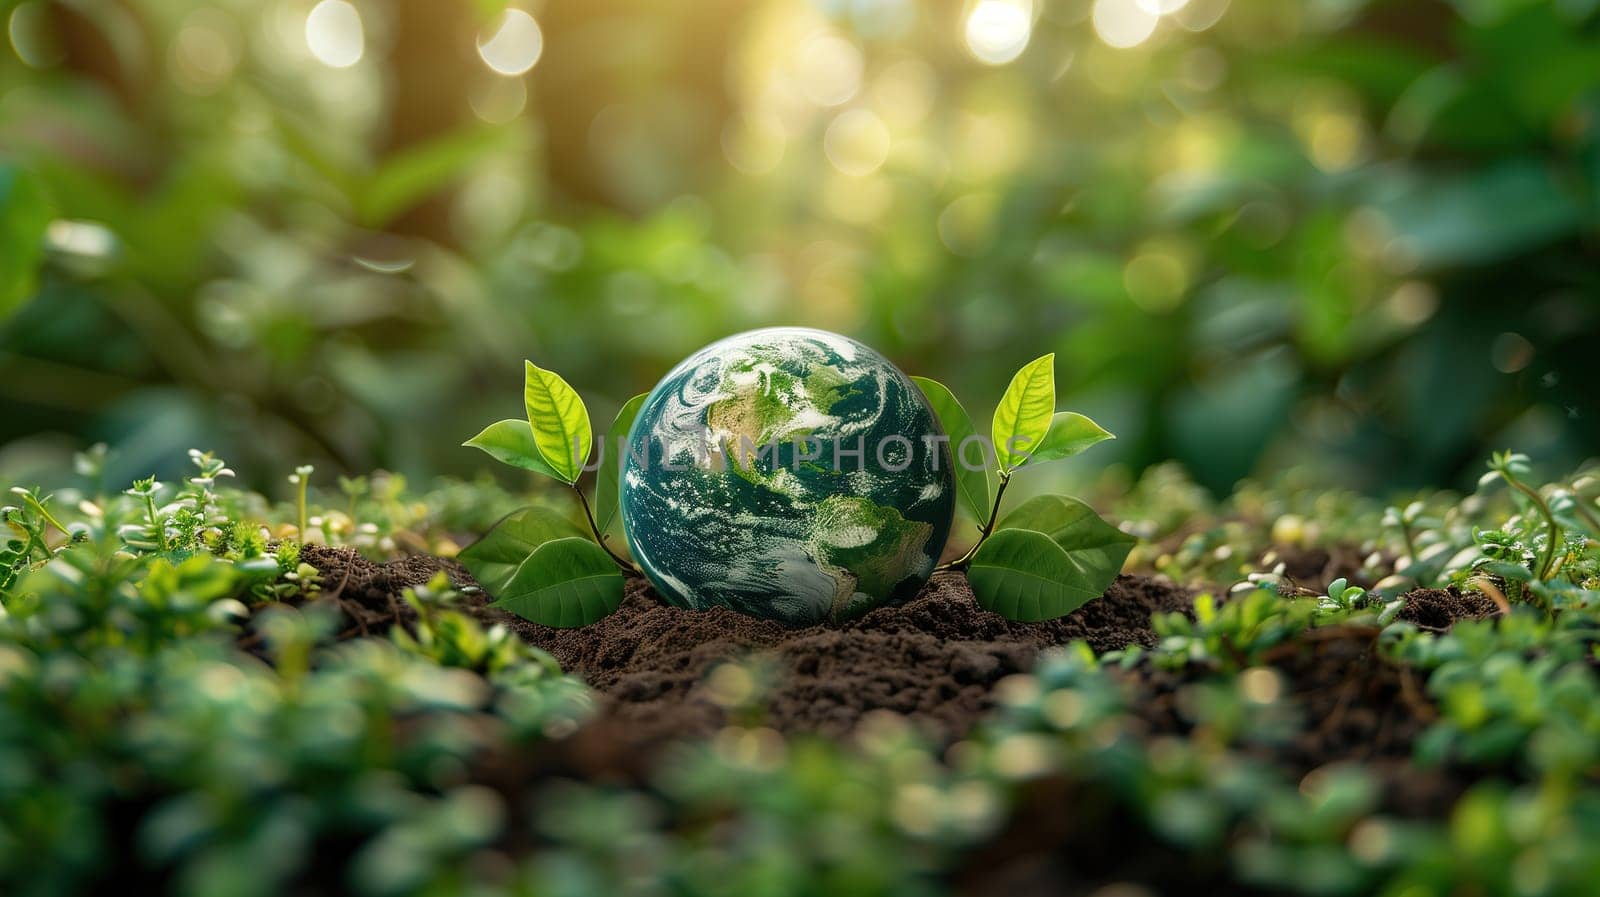 A green earth is precariously perched on top of a mound of dirt. The contrast between the vibrant green globe and the brown, textured soil is striking in this Earth Day concept.